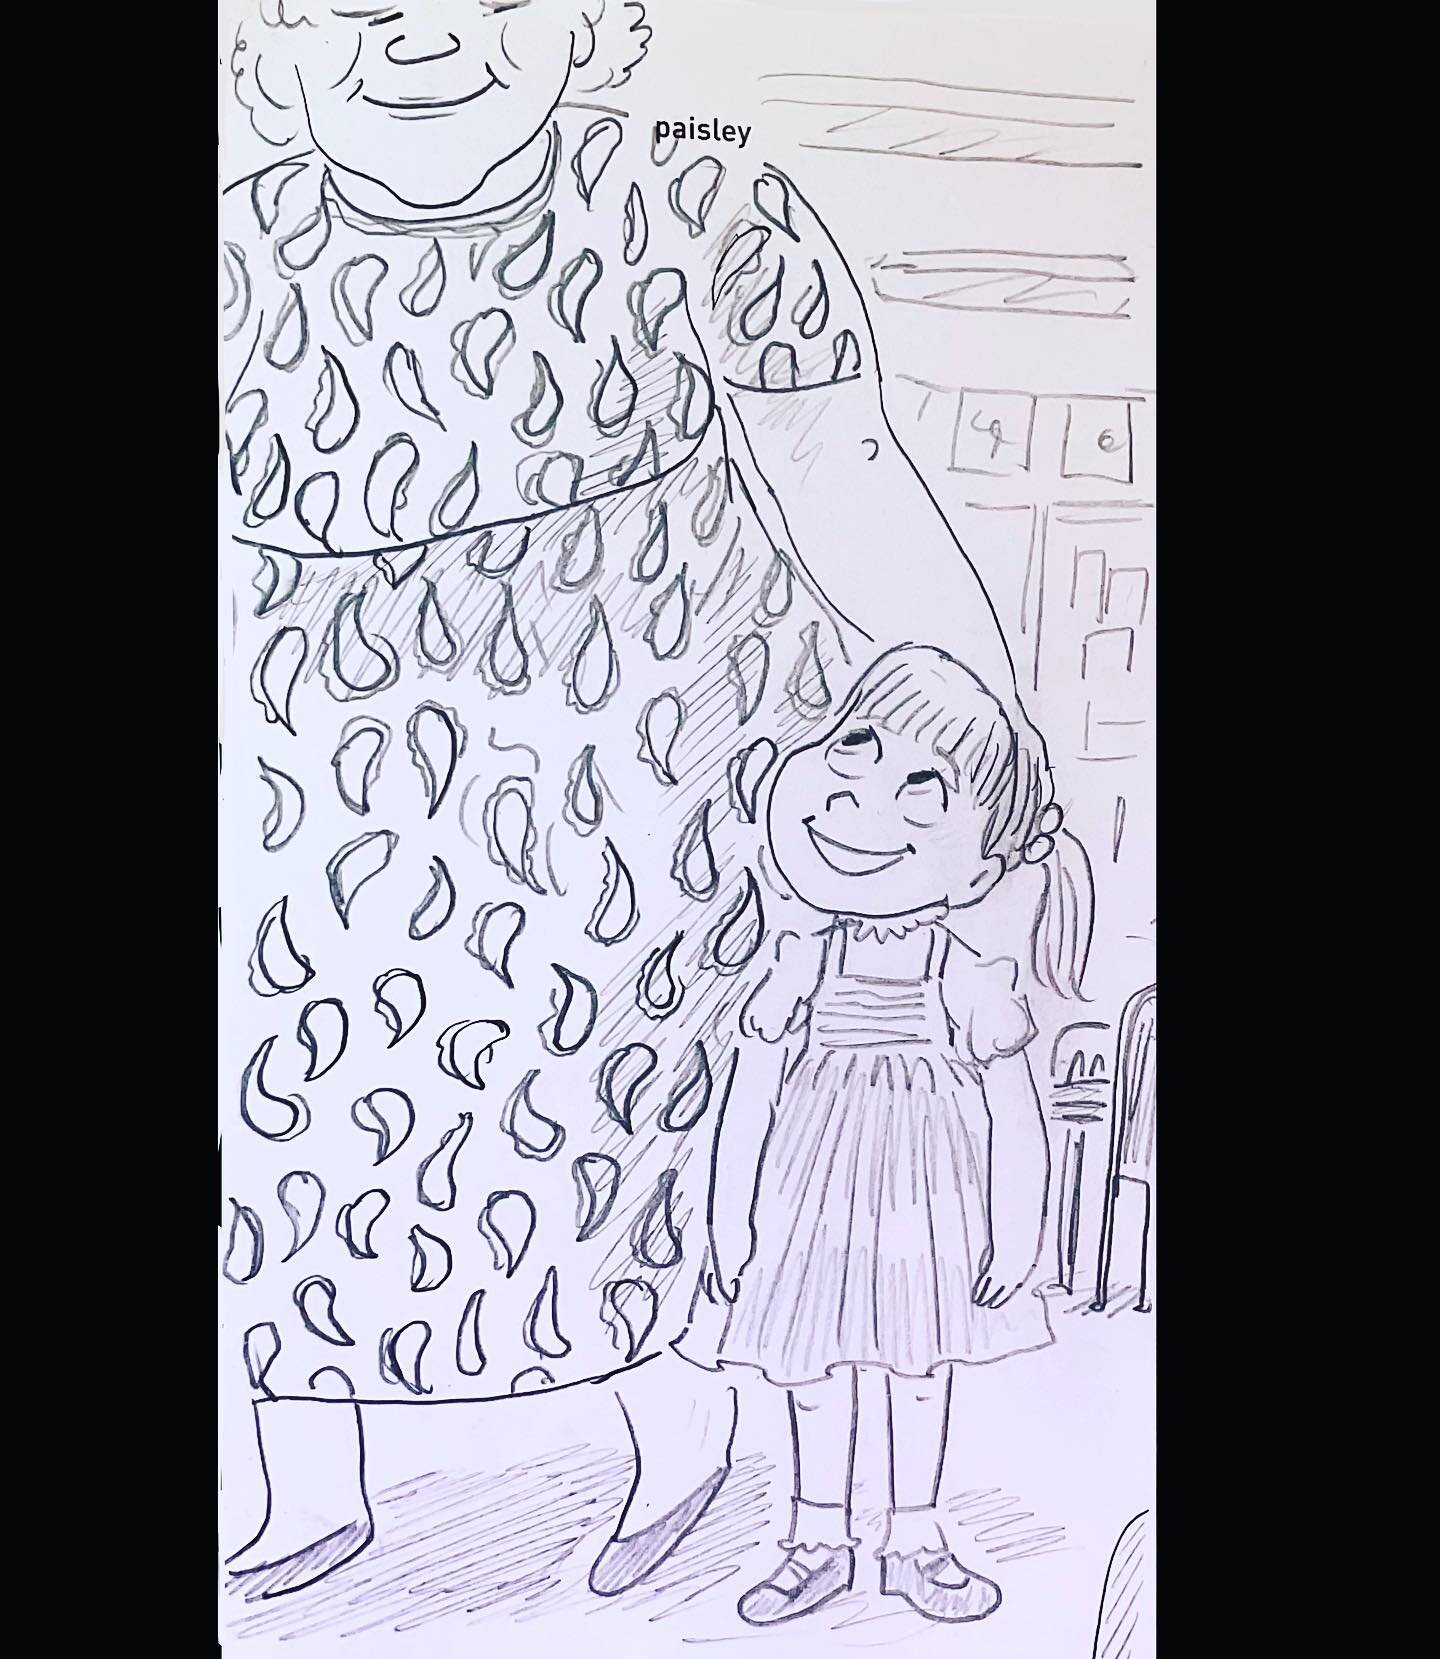 Something I love about prompt drawing is how it gets your mind to recall details that have gotten lost in the memory clutter. This one I drew a while back, my Kindergarten teacher always wore dresses with paisleys on them.